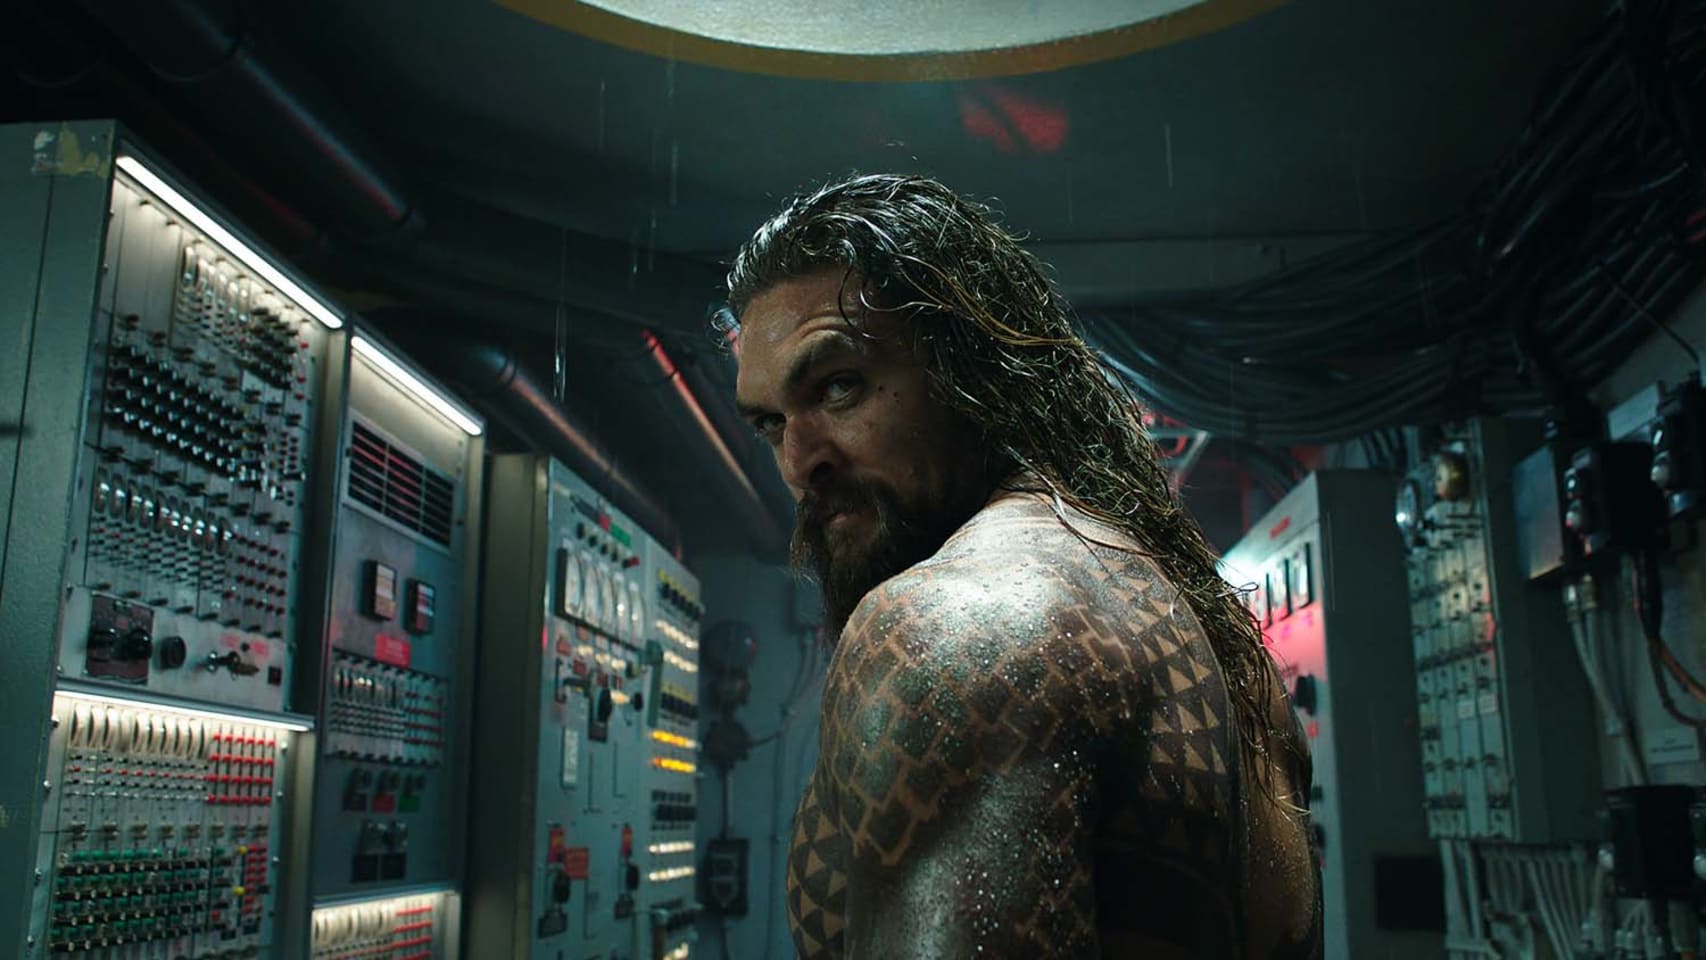 Amazon is hosting an advance screening of Aquaman exclusively for Prime members